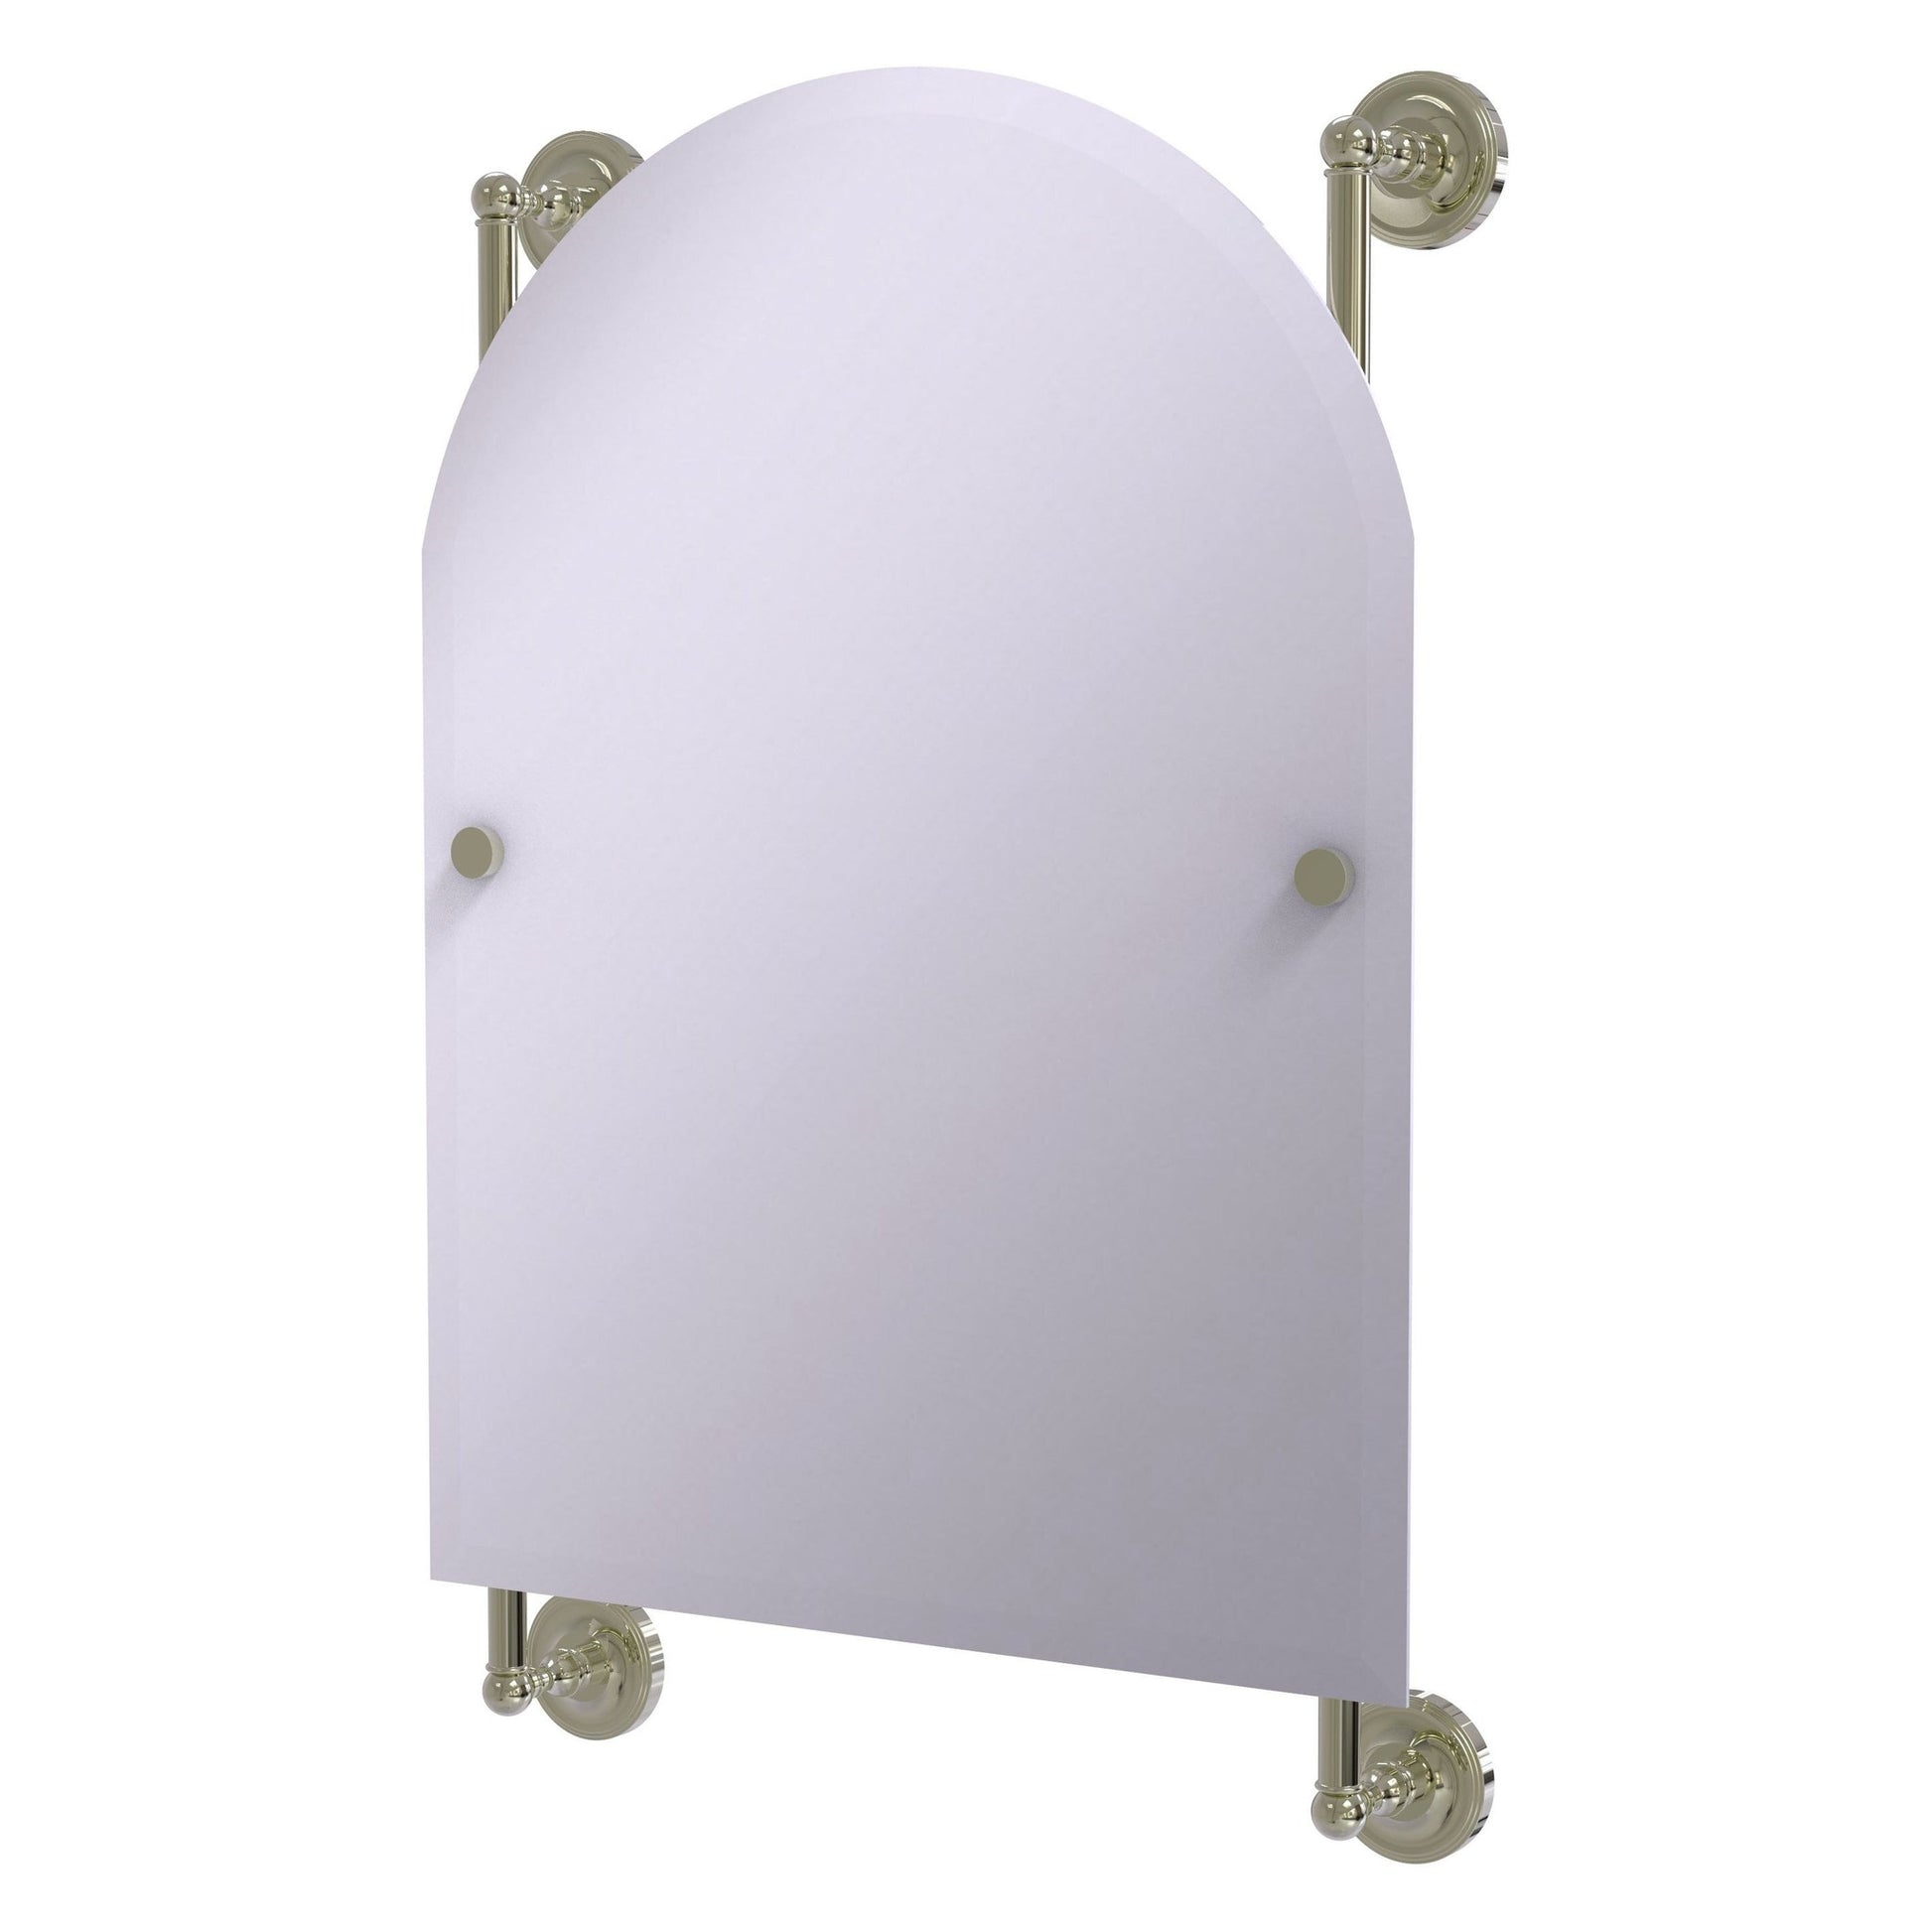 Allied Brass Prestige Regal 21" x 3.8" Polished Nickel Solid Brass Arched-Top Frameless Rail Mounted Mirror